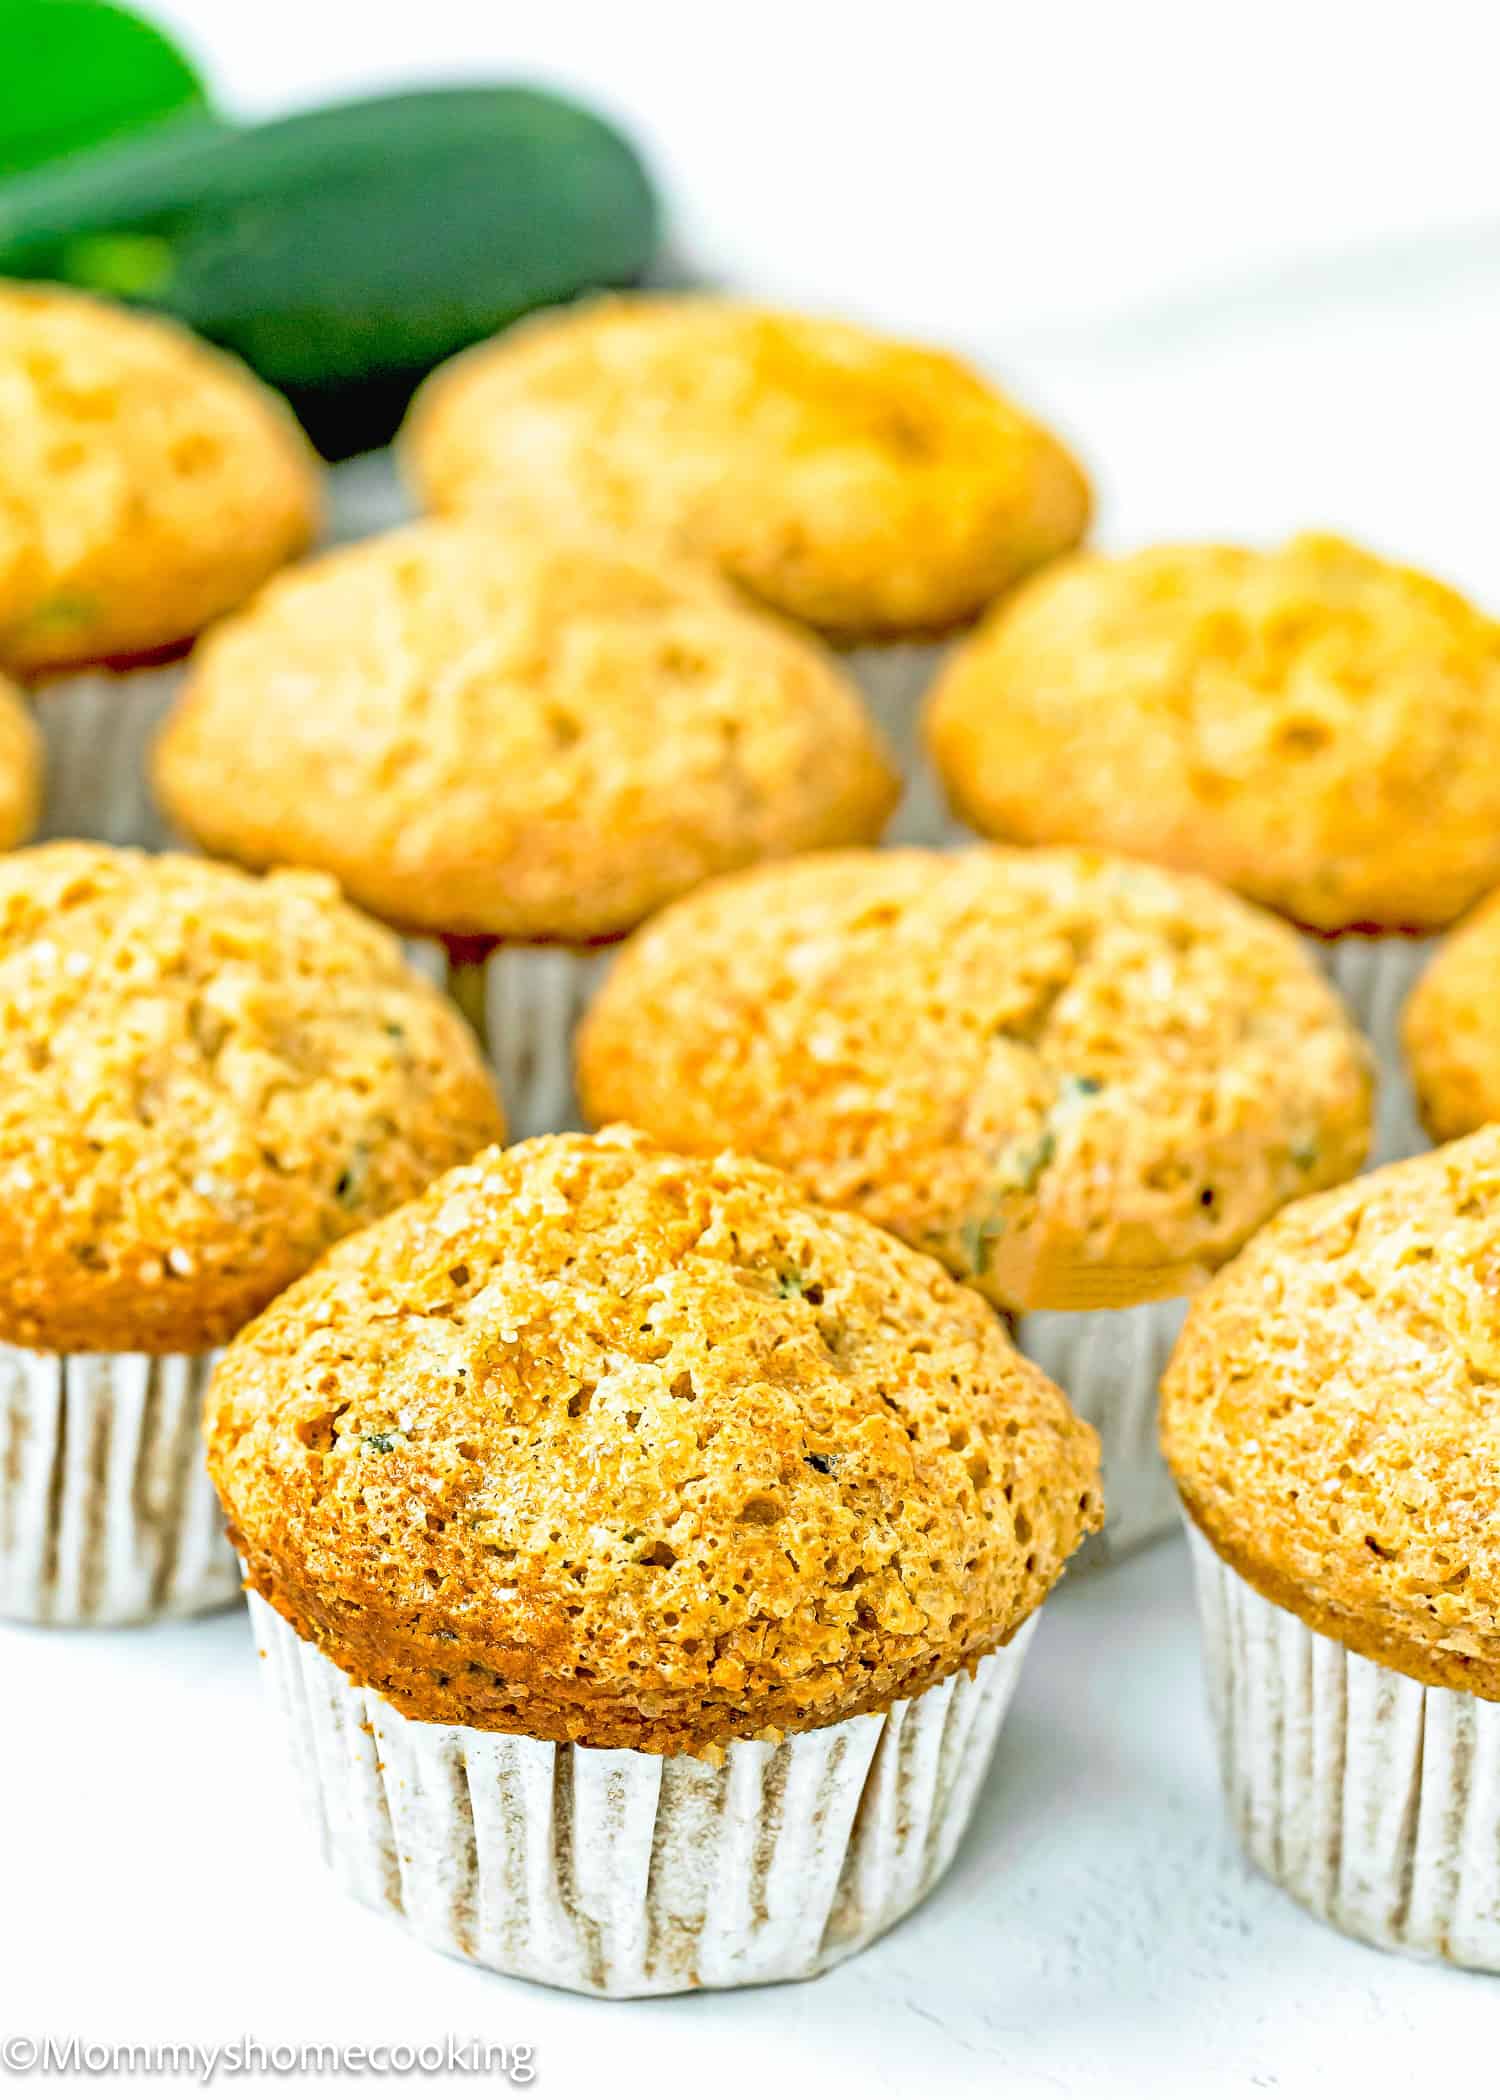 egg-free and dairy-free Zucchini Muffins over a white surface.